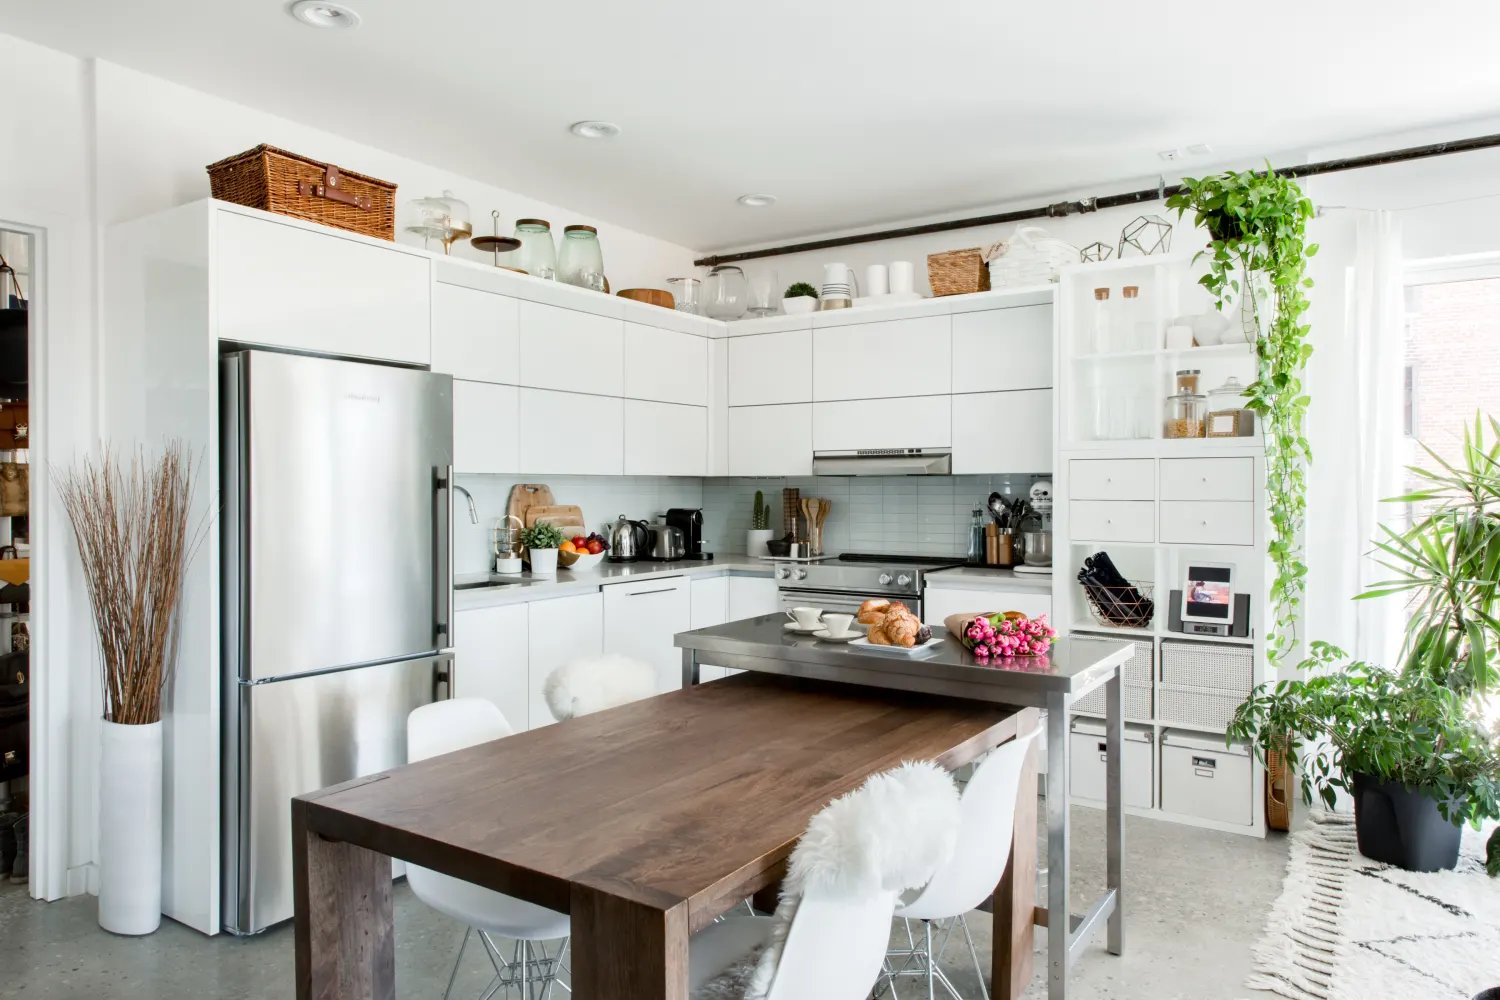 How To Eliminate Empty Space In Your Kitchen: Experts Advise